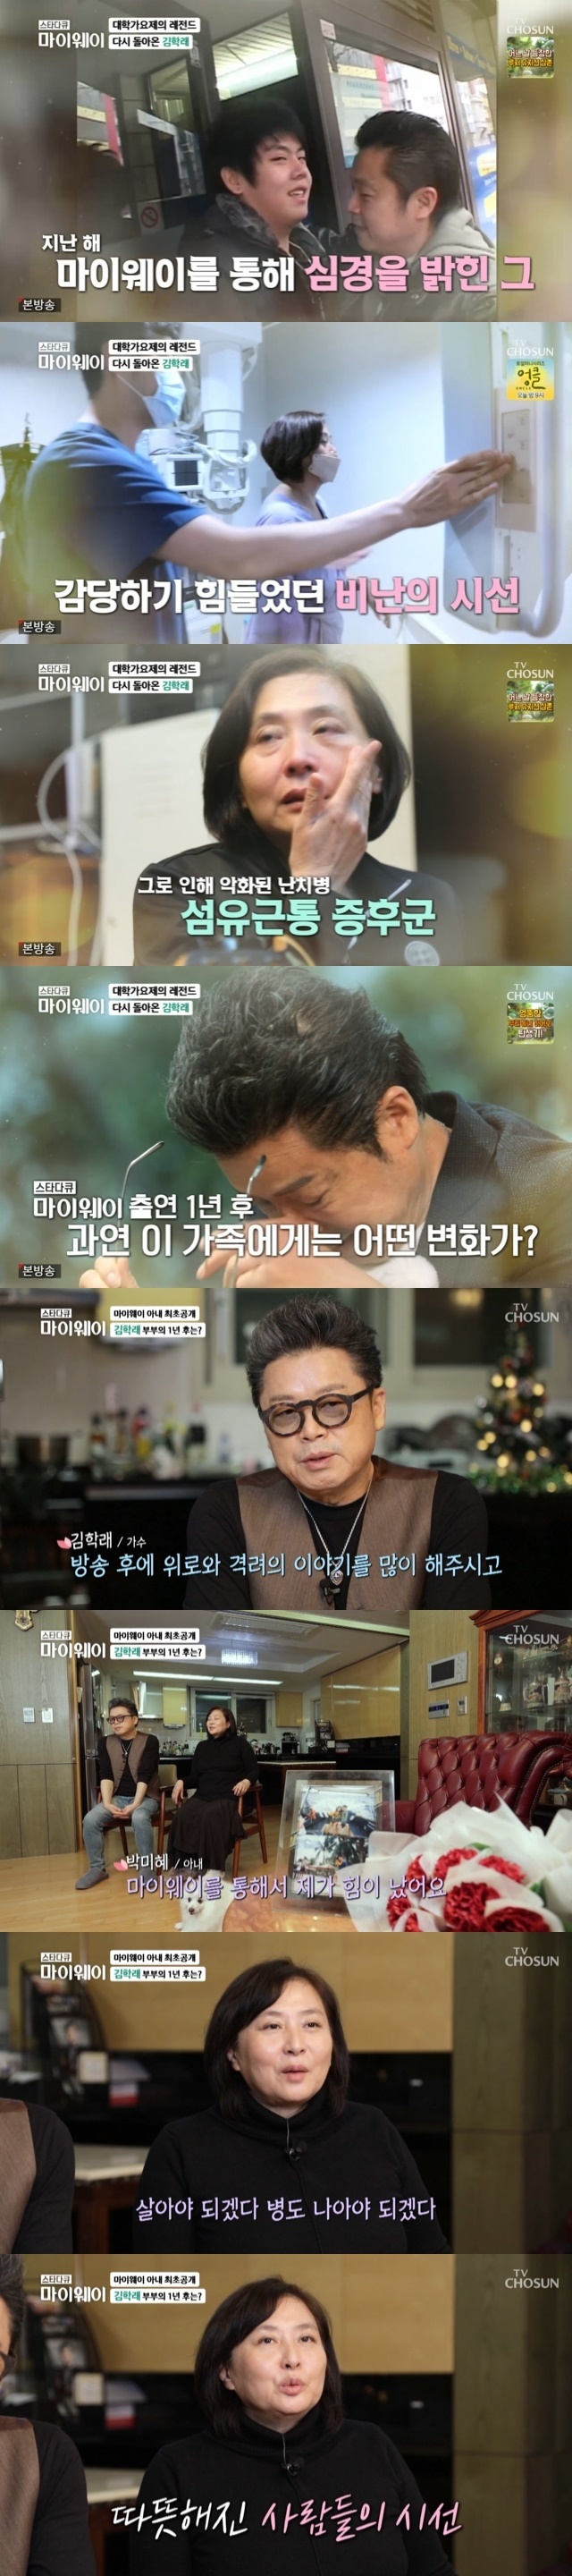 Kim Hak-rae and his wife explained the change in the surrounding Sight after explaining to Lee Seong-Mi For Keeps Scandal.In the 276th TV drama Star Documentary Myway (hereinafter referred to as My Way), which was broadcast on December 12, singer Kim Hak-rae, who was a member of MBC College Musicians Festival, re-appeared in broadcasting in a year and five months.Kim Hak-rae won the grand prize at the 3rd MBC MBC College Musicians Festival 1979 and made his debut in the music industry and released six albums in total, but suddenly he had to leave the music industry.This is because, when he marriages his wife Park Mi-hye in 1990, his For Keeps Scandal with his lover Lee Seong-Mi broke out before the same period.At that time, Kim Hak-rae left for Germany as if he were running away with his family in silence.In July 2020, Kim Hak-rae appeared on My Way with his wife and actively explained to the Scandal rumor that he pursued him for about 30 years.Kim Hak-rae said, I left to save the two people, he said. If I continued my activities, my mother would not be able to act.I really want to apologize and I want to comfort and I want to solve some stories together. In addition, he was saddened by the fact that his son was bullied by the Scandal, and his wife was shocked by the surrounding Misunderstood and criticism, and eventually suffered from incurable disease, fibromyalgia syndrome.Kim Hak-rae and his wife responded to the change after the broadcast. Kim Hak-rae, who could not easily speak, said, After the broadcast, he told a lot of stories of comfort and encouragement.When I go out on the street, I say hello more than before and I am glad to hear that you said, Last time I saw My Way, please try hard and work hard.Thank you so much. Kim Hak-raes wife, Park Mi-hye, said, Through My Way, I was empowered and courageous. I have to live harder and exercise, and I have decided to get better.I could see people with my head up.Many people have been Misunderstood and have spoken a lot of criticism. I am grateful to you for the fact that Misunderstood is released in that part and the Sight looking at my father (Kim Hak-rae) has changed. Kim Hak-raes wife also revealed that she has improved her health a lot.Park Mi-hye, who wore long sleeves in summer with a sick body even if he passed the last broadcast wind, said, I got better than last year.Kim said, I am a mental cloud when this person is sick. If this person is healthy, I can be loved.I have to get up quickly and get up to get better. 